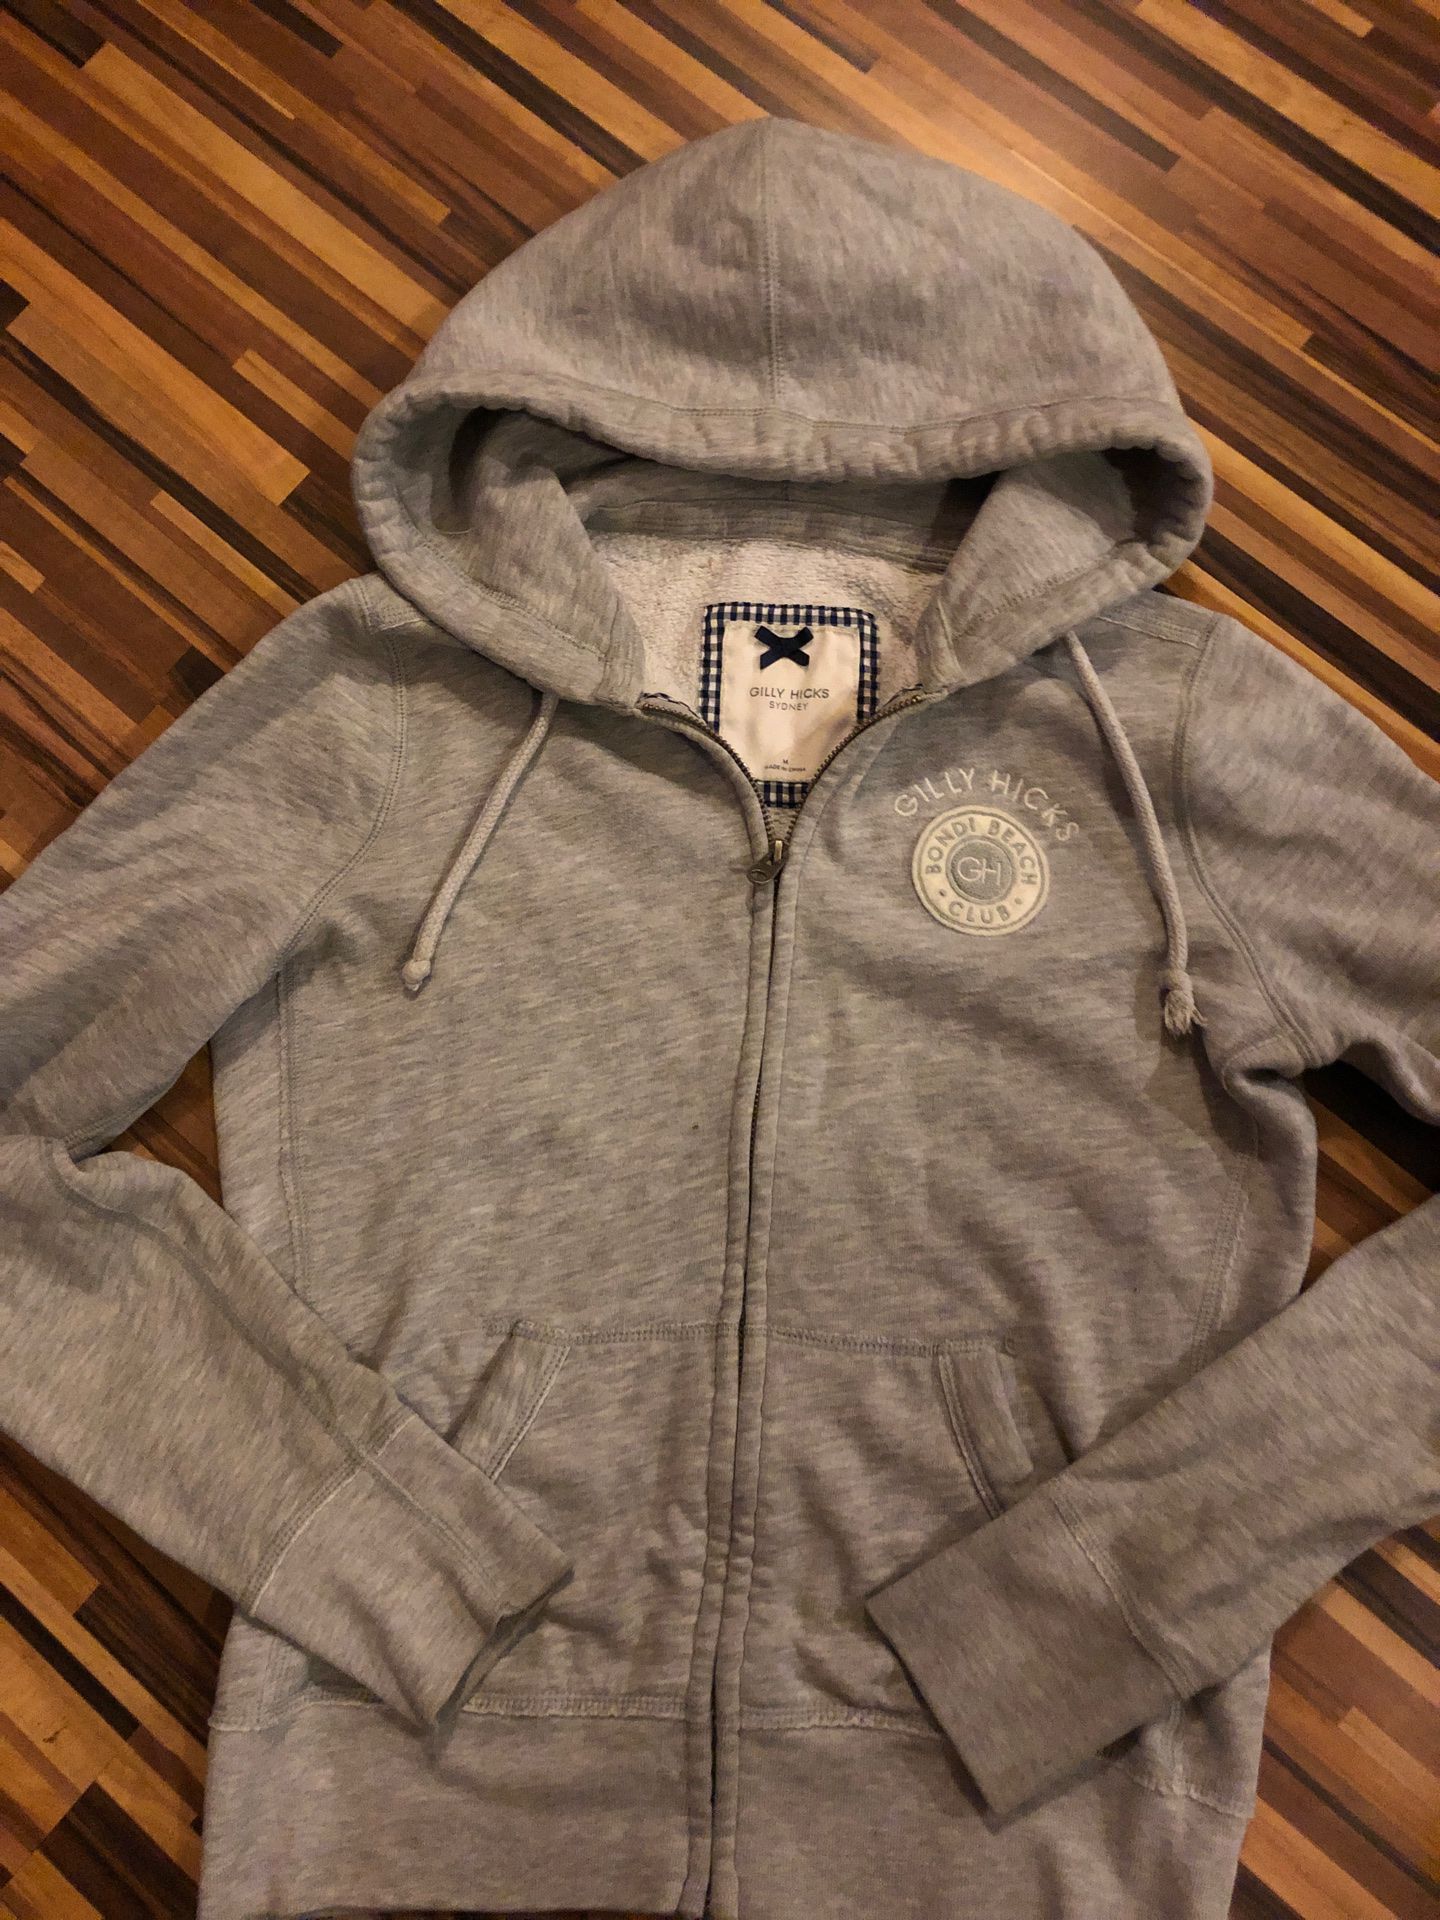 Gilly Hicks - Hollister hoodie size: M